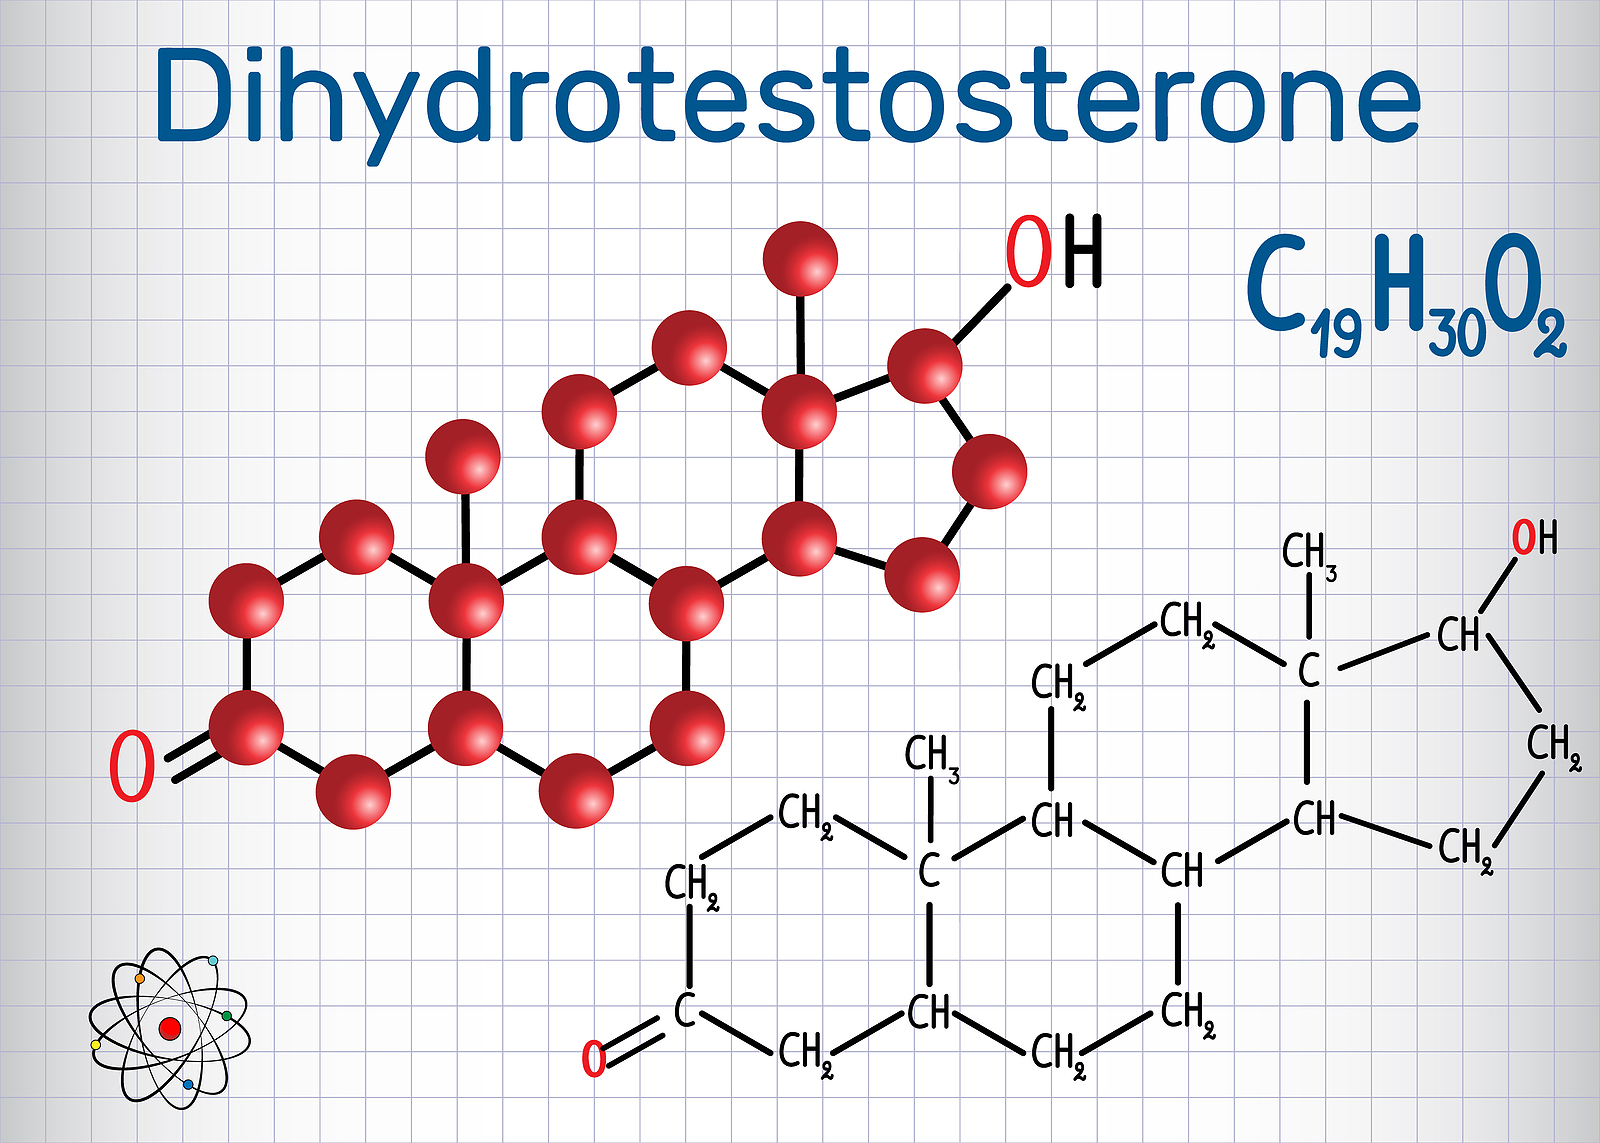 Dihydrotestosteron DHT